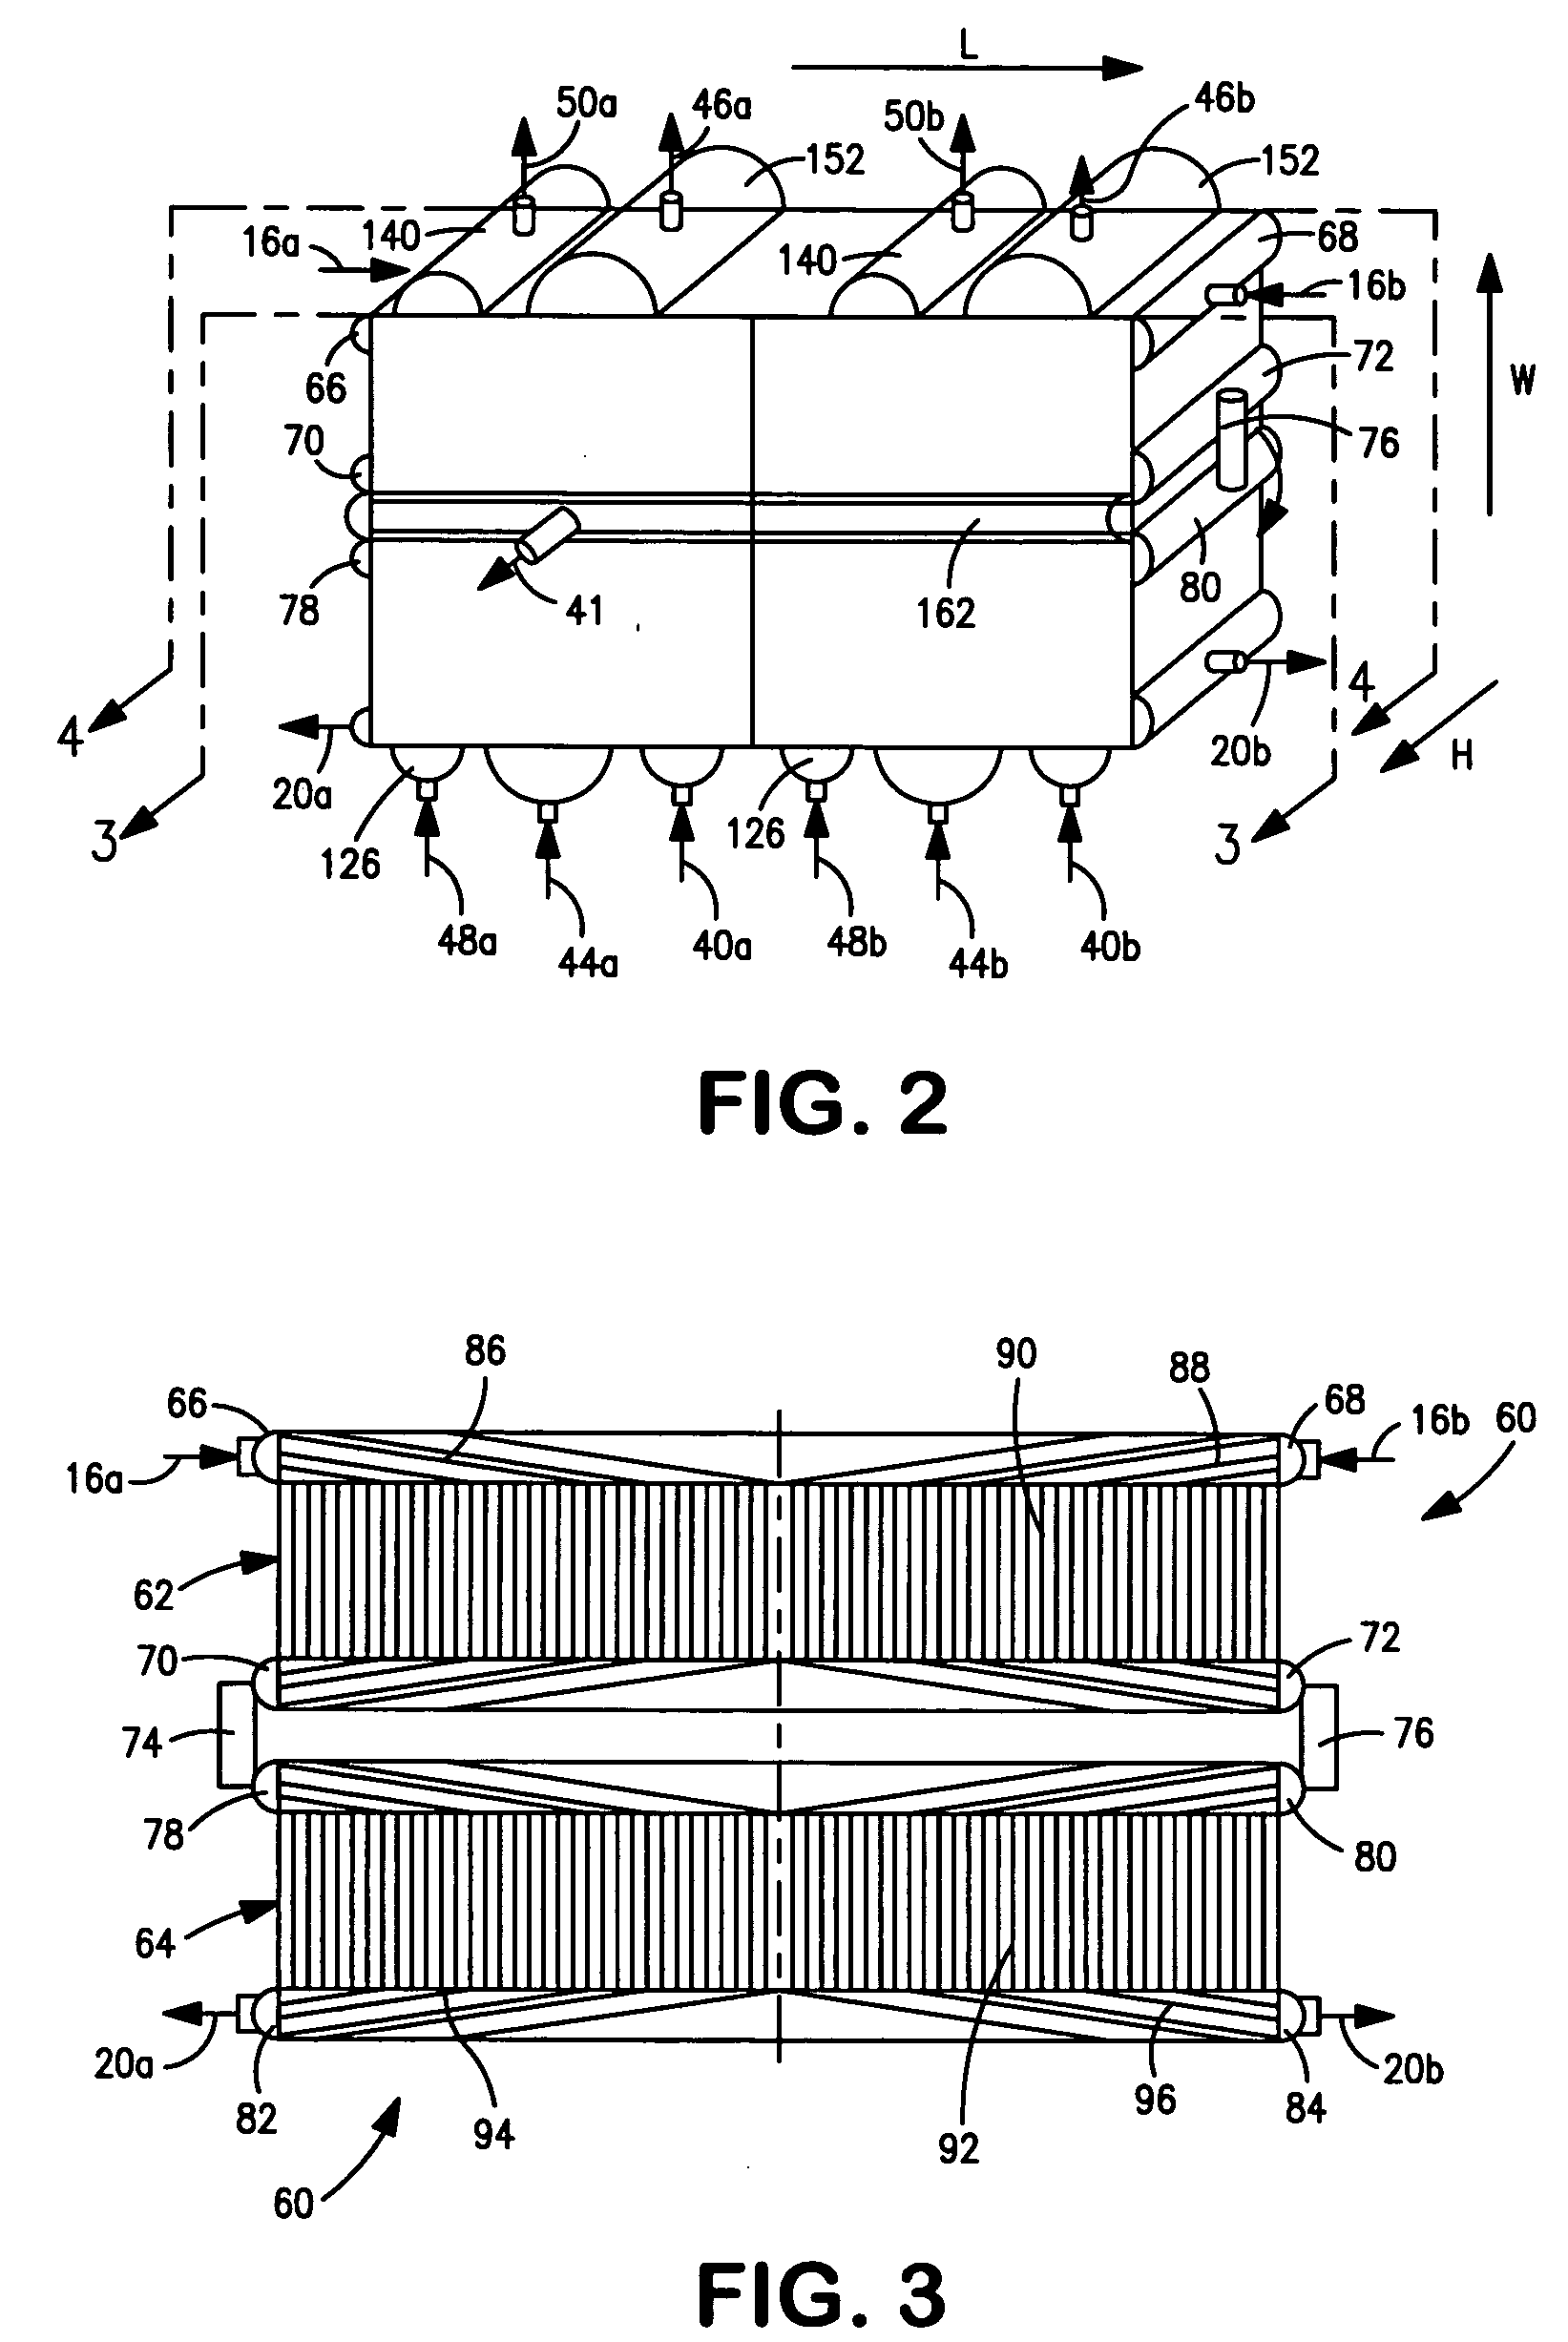 Plate-fin heat exchanger having application to air separation